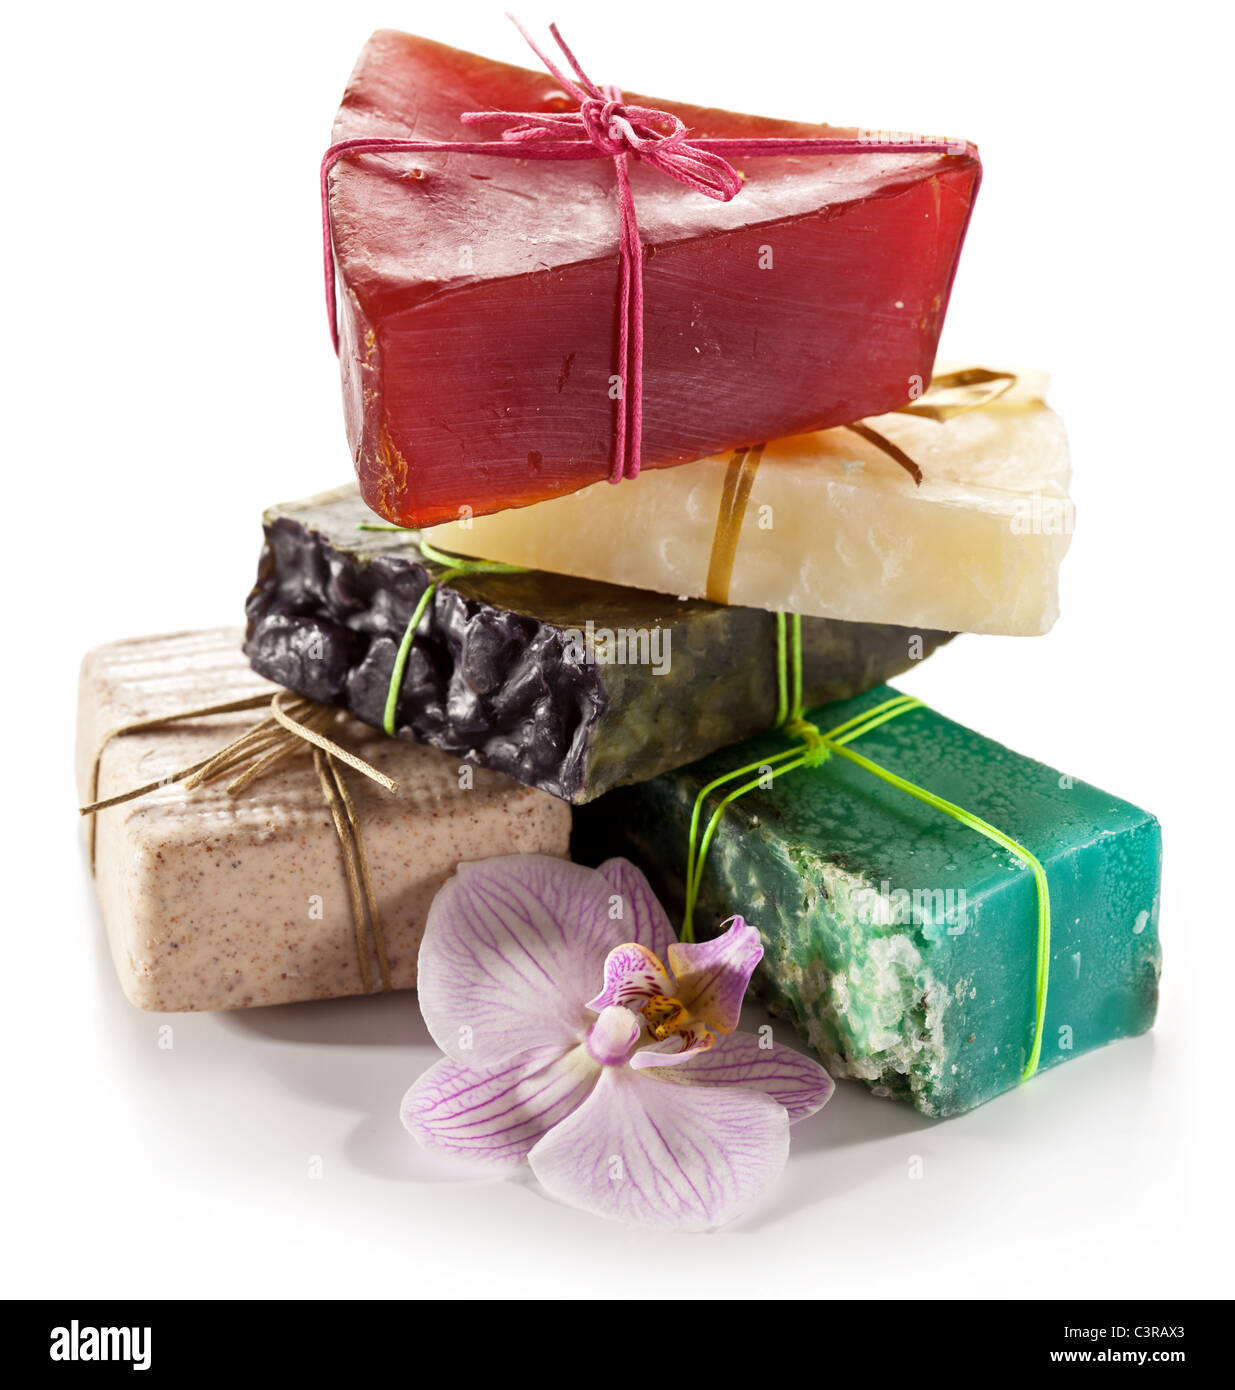 Range of different soaps on a white background. Stock Photo